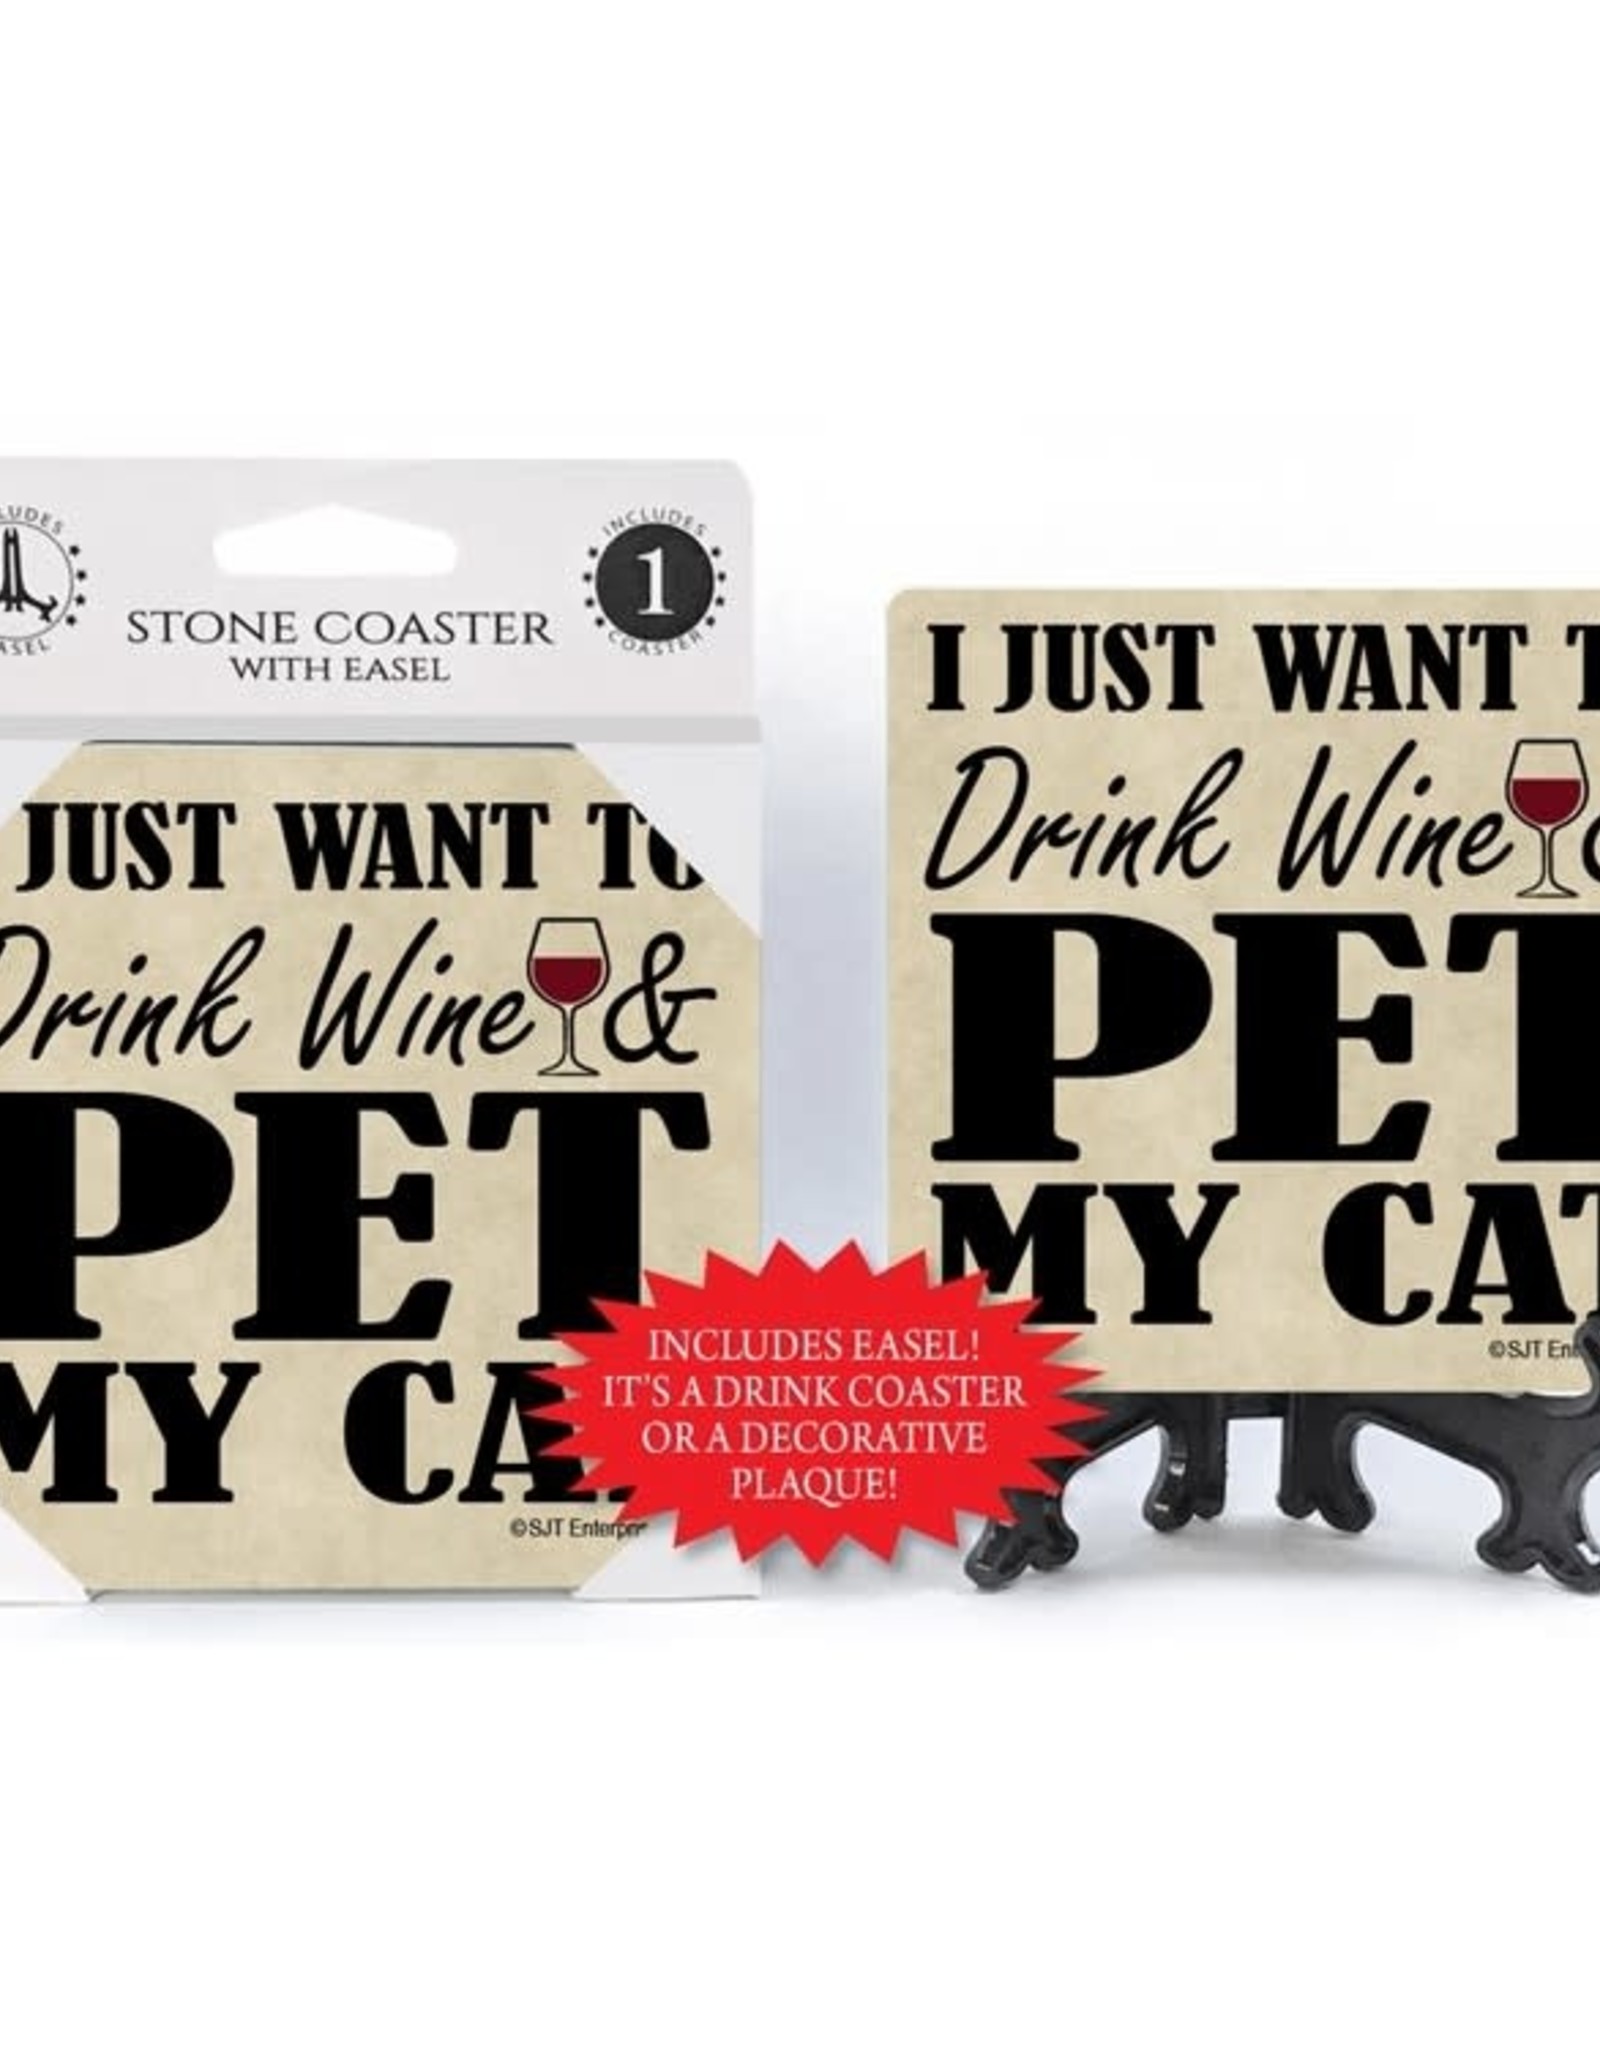 Stone Coaster - I just want to drink wine and pet my cat